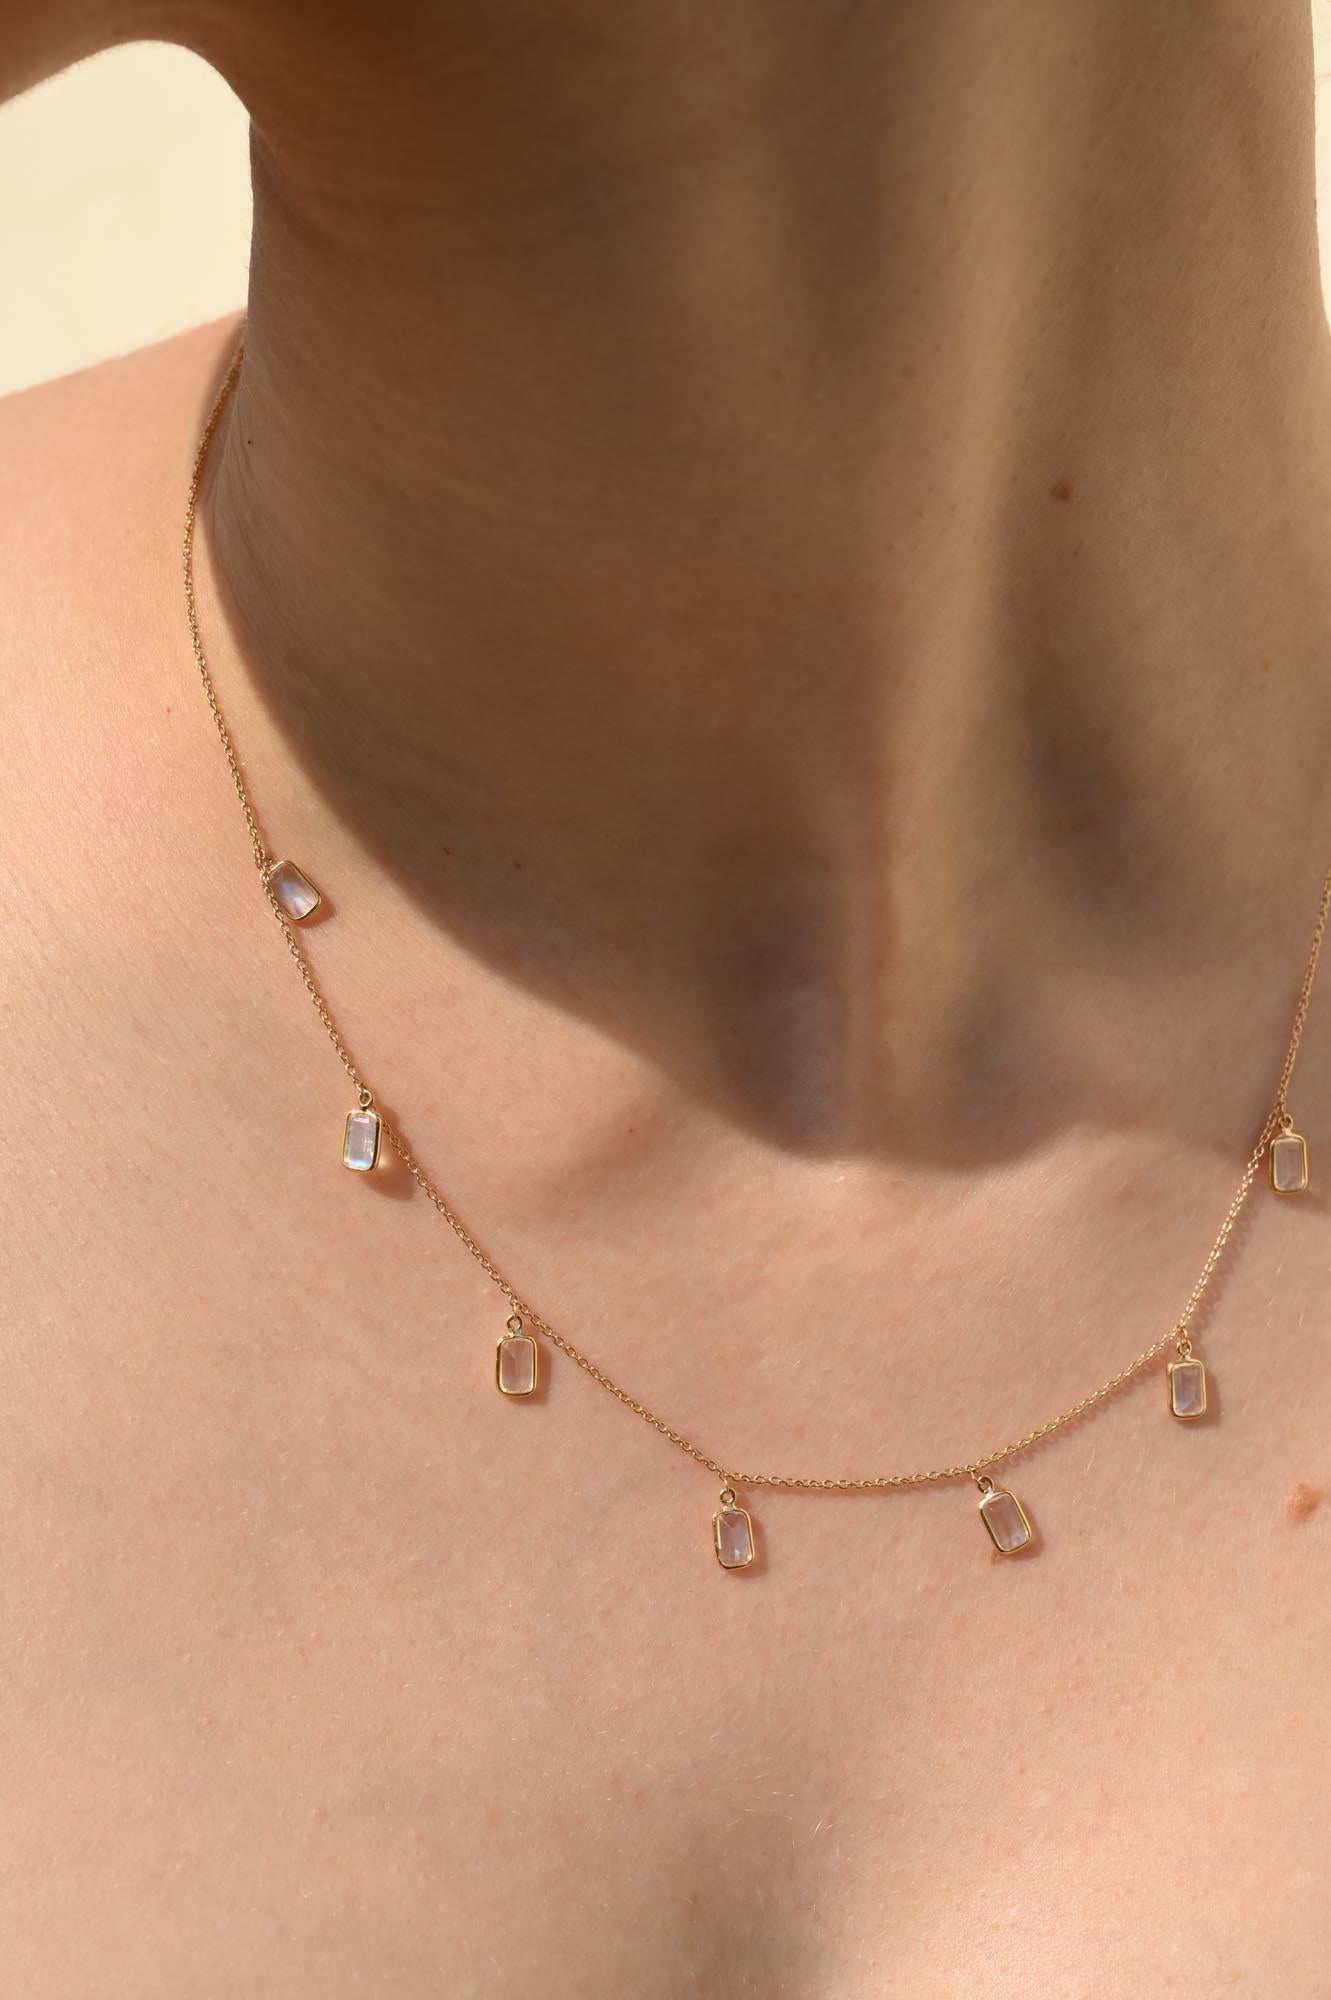 Rainbow Moonstone Chain Necklace Gift for Girlfriend in 18k Solid Yellow Gold In New Condition For Sale In Houston, TX